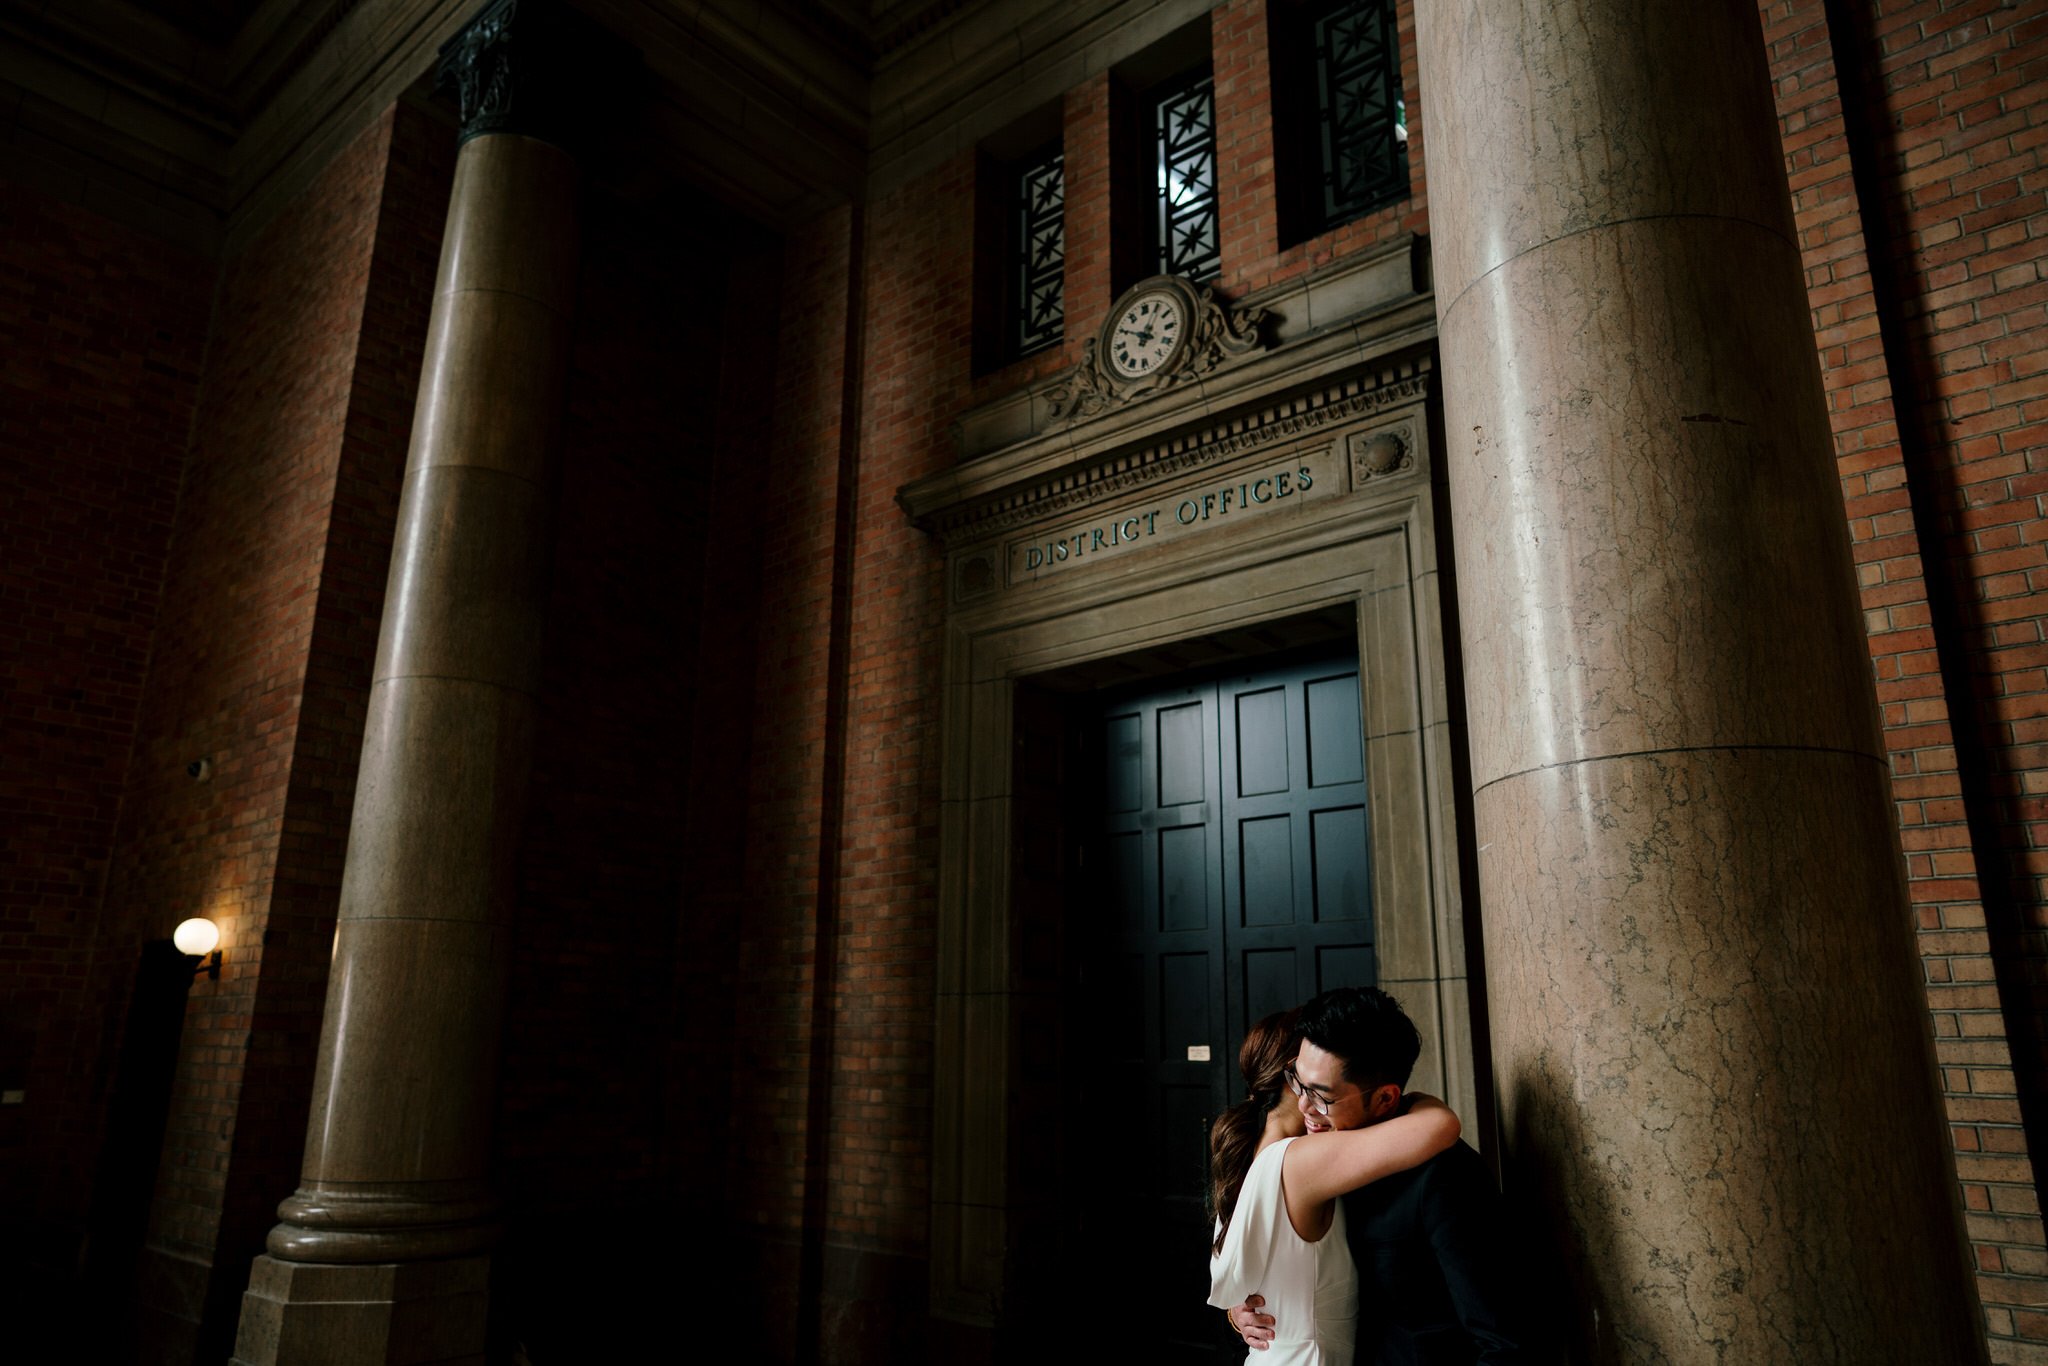 auckland-wedding-photographer-videographer-story-by-koo-koo's-jewelry-dear-white-productions-old-train-station-new-zealand-moody-historical-pre-wedding-engagement-photo (12).JPG